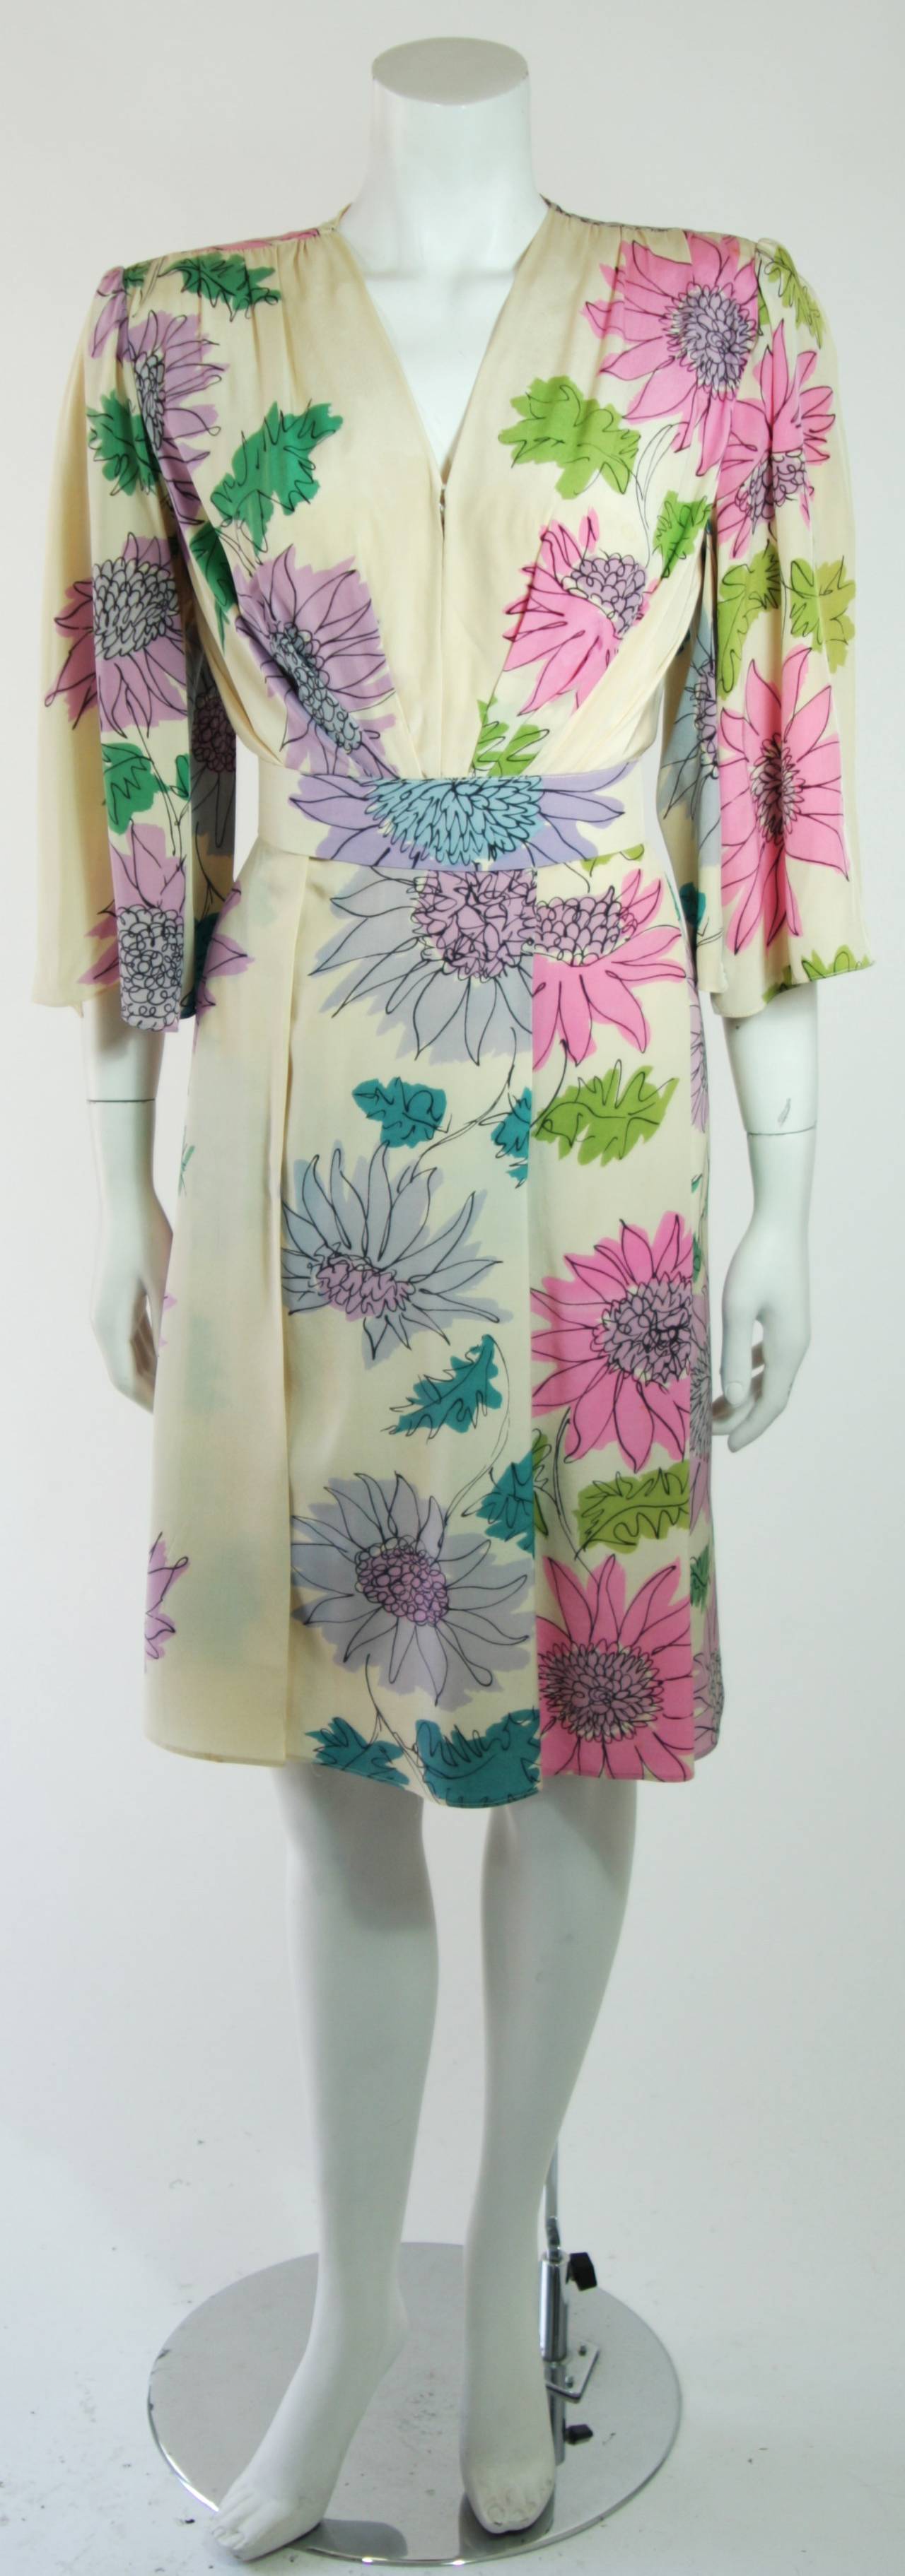 Gray Leon Paule for Nolan Miller Silk Watercolor Dress with Cascades Size Small